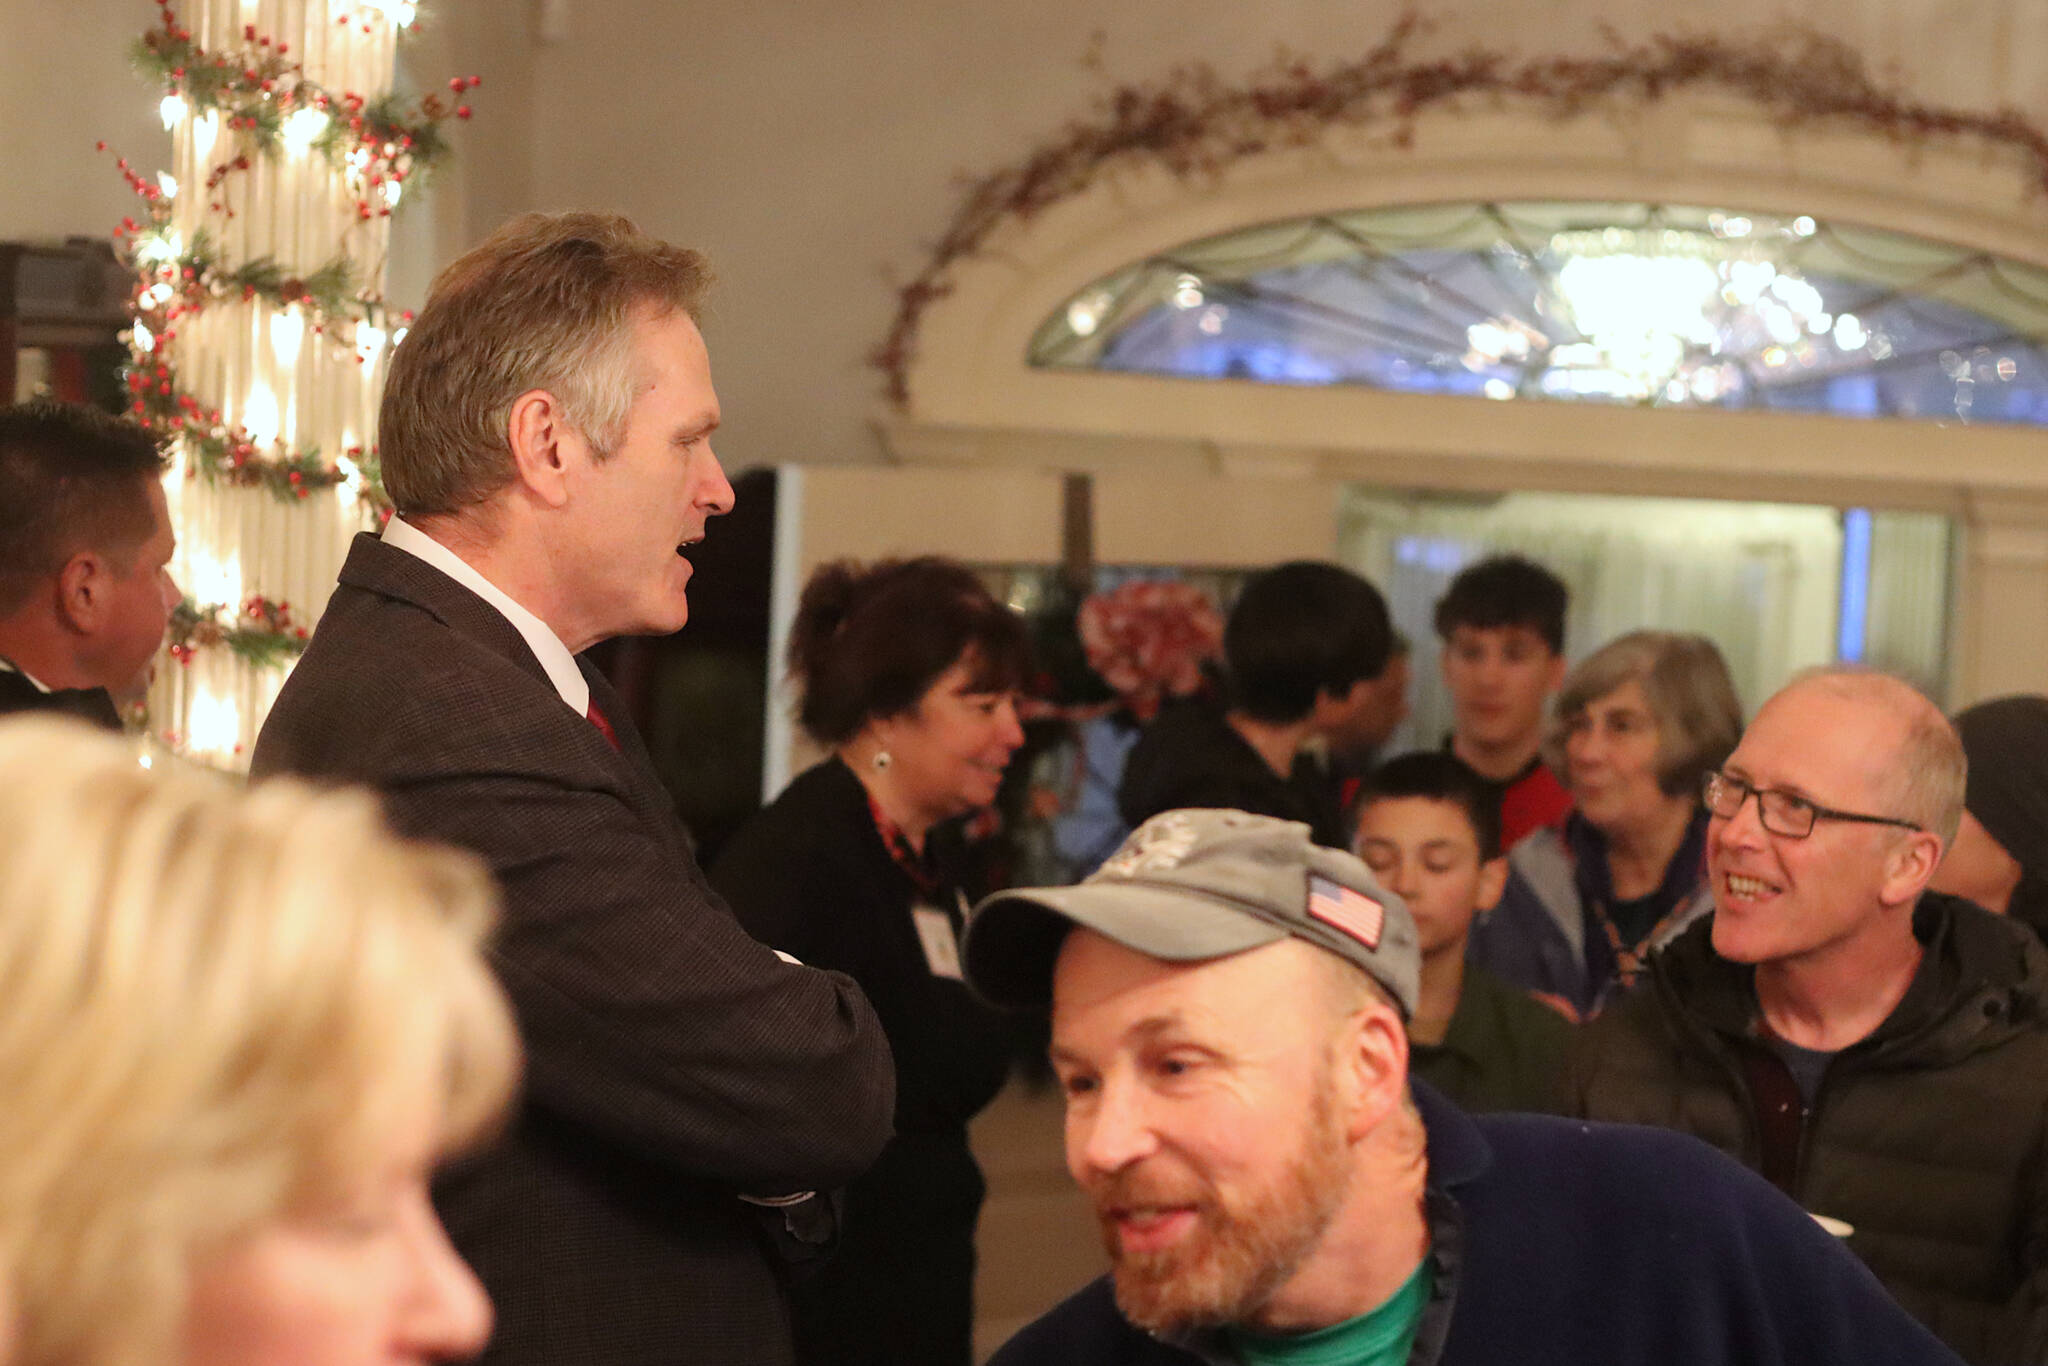 Gov. Mike Dunleavy greets visitors to the annual holiday open house at the governor’s mansion on Tuesday. Hundreds of people indulged in cookies and music by local students during the three-hour event. (Mark Sabbatini / Juneau Empire)